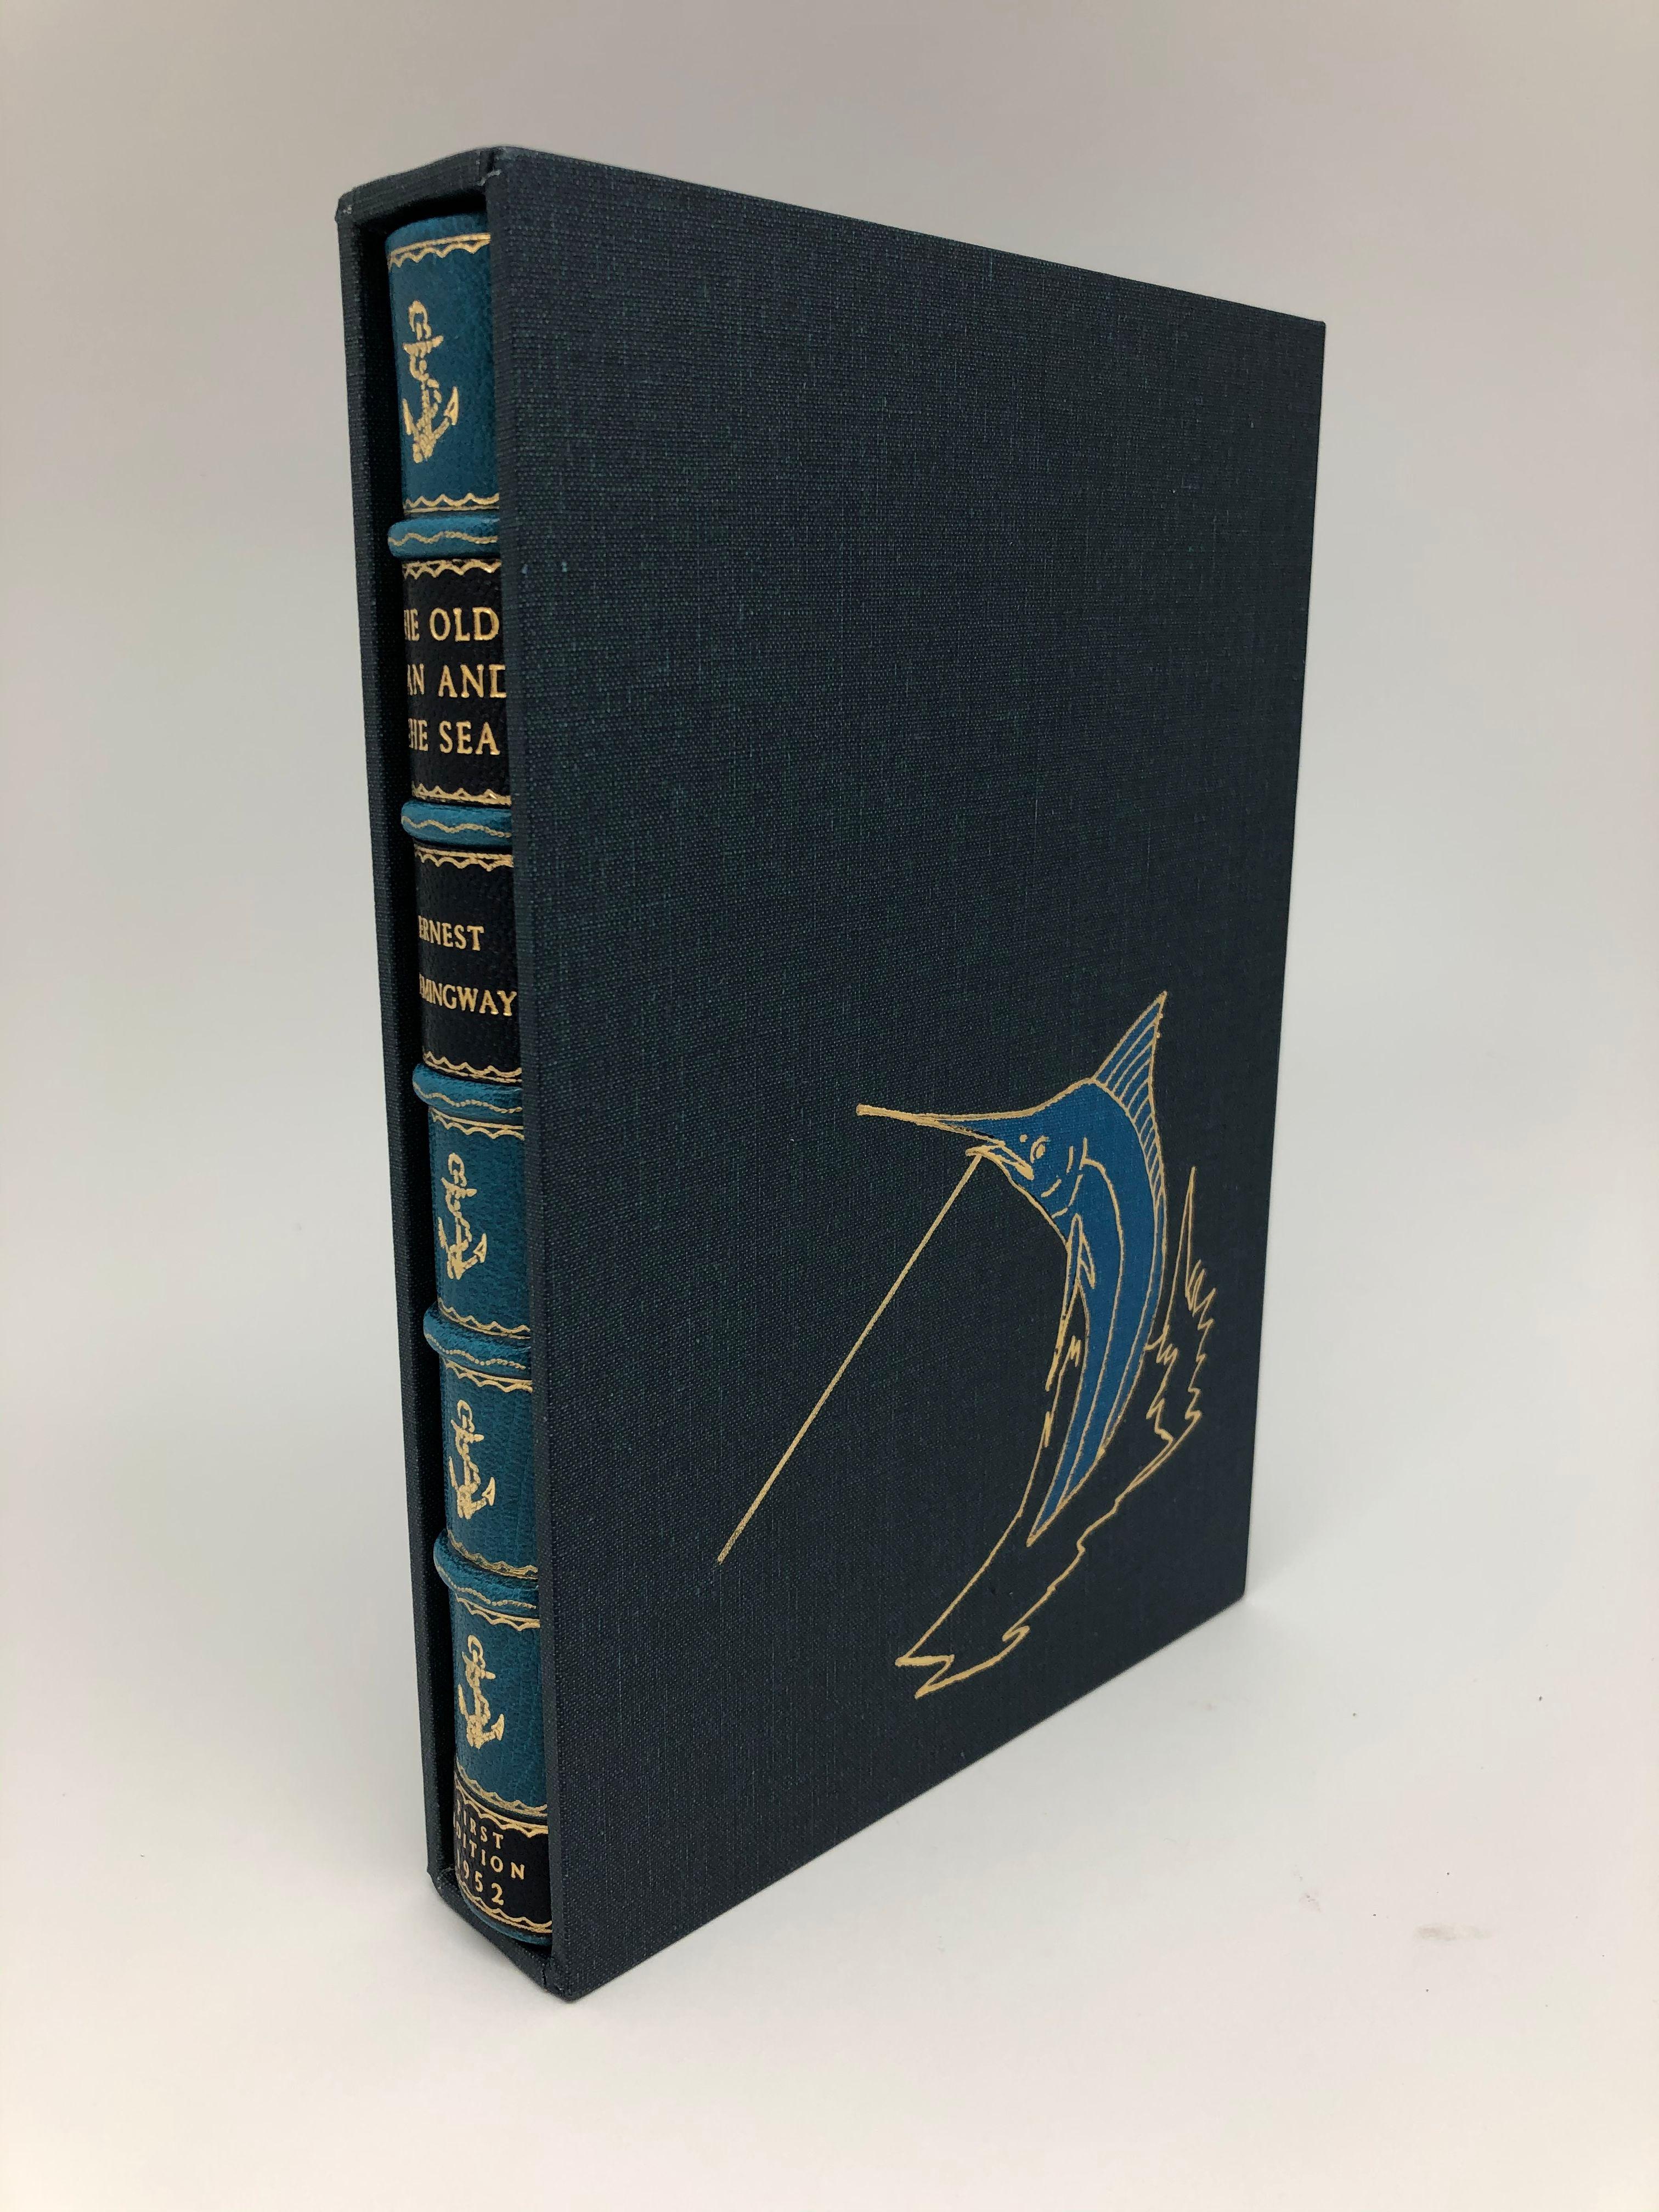 Hemingway, Ernest, The Old Man and the Sea. 1952, New York: Charles Scribner's Sons. First Edition. Rebound in blue Morocco leather with custom slipcase.

Bearing the publisher’s signature “A” this is a stated first edition, of which, only 50,000